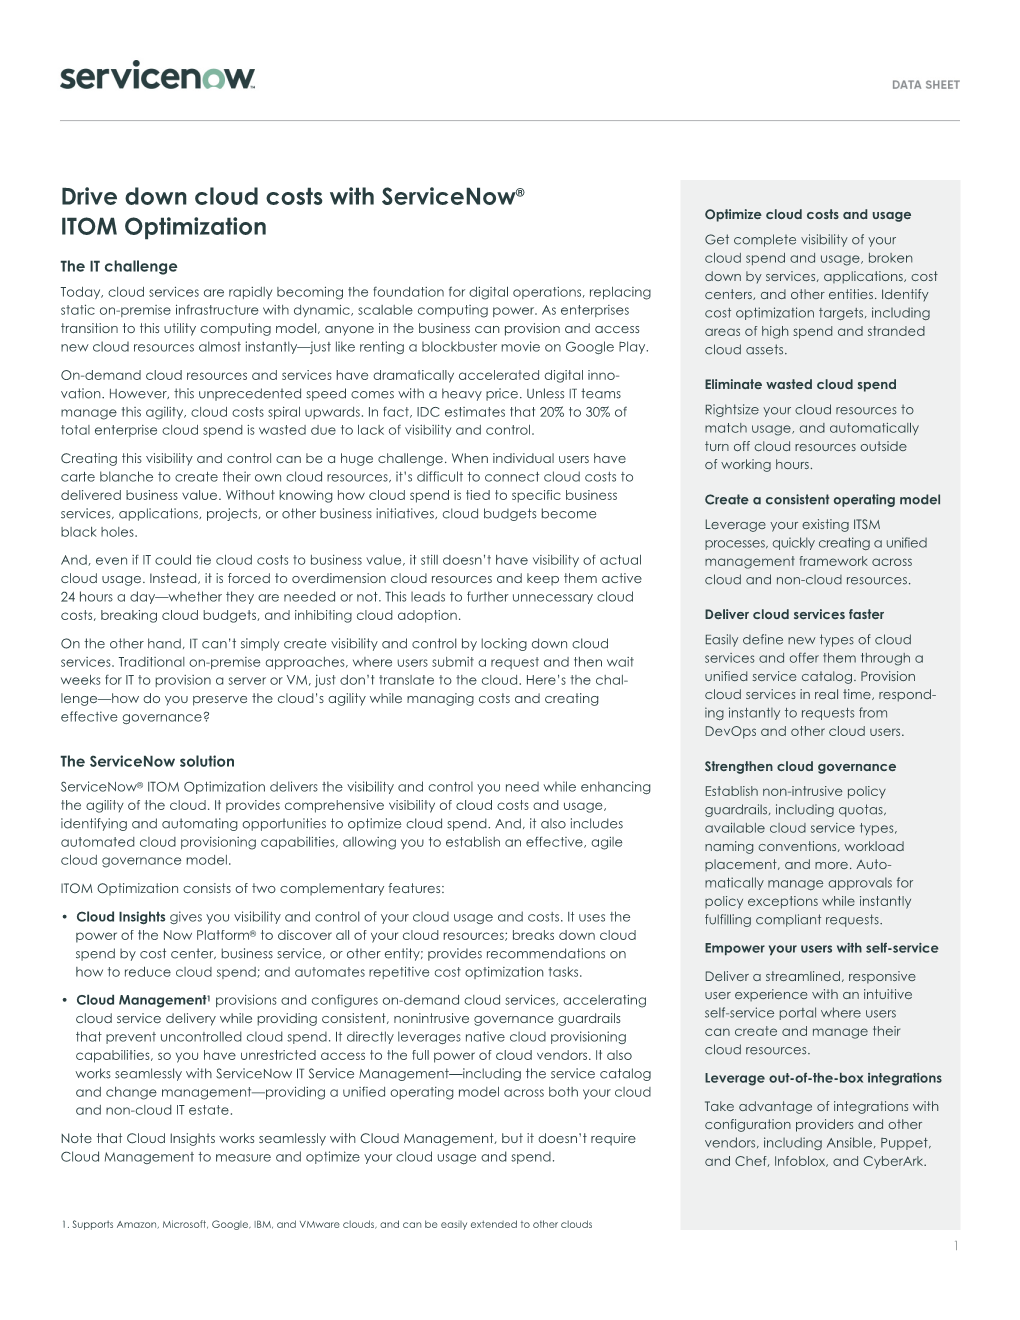 Drive Down Cloud Costs with Servicenow® ITOM Optimization